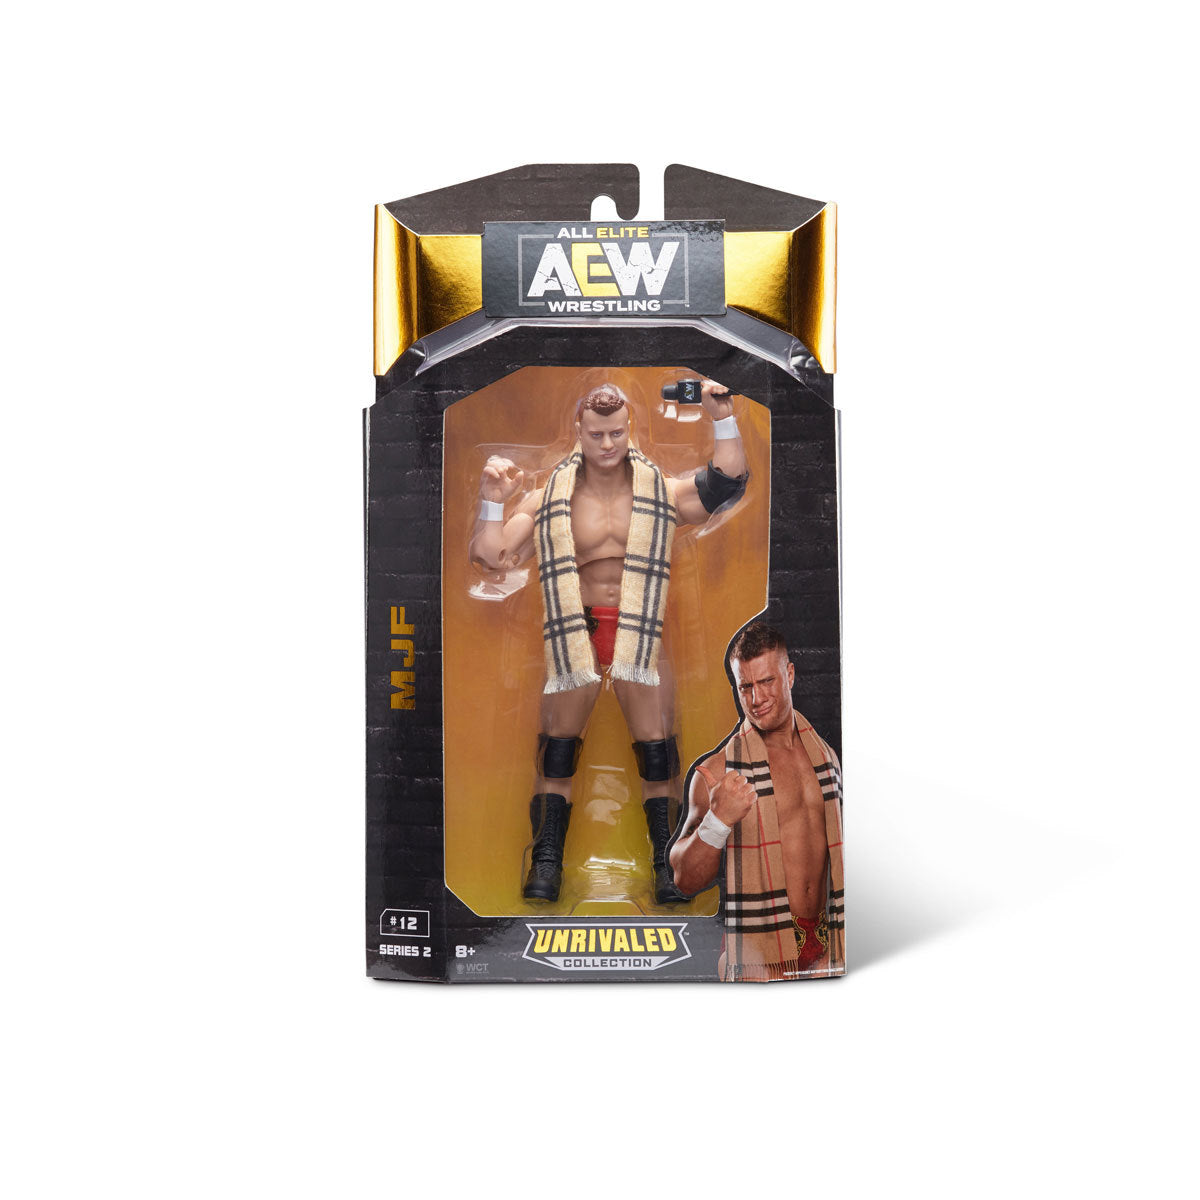 AEW 6.5' Unrivaled Collection Figure - MJF